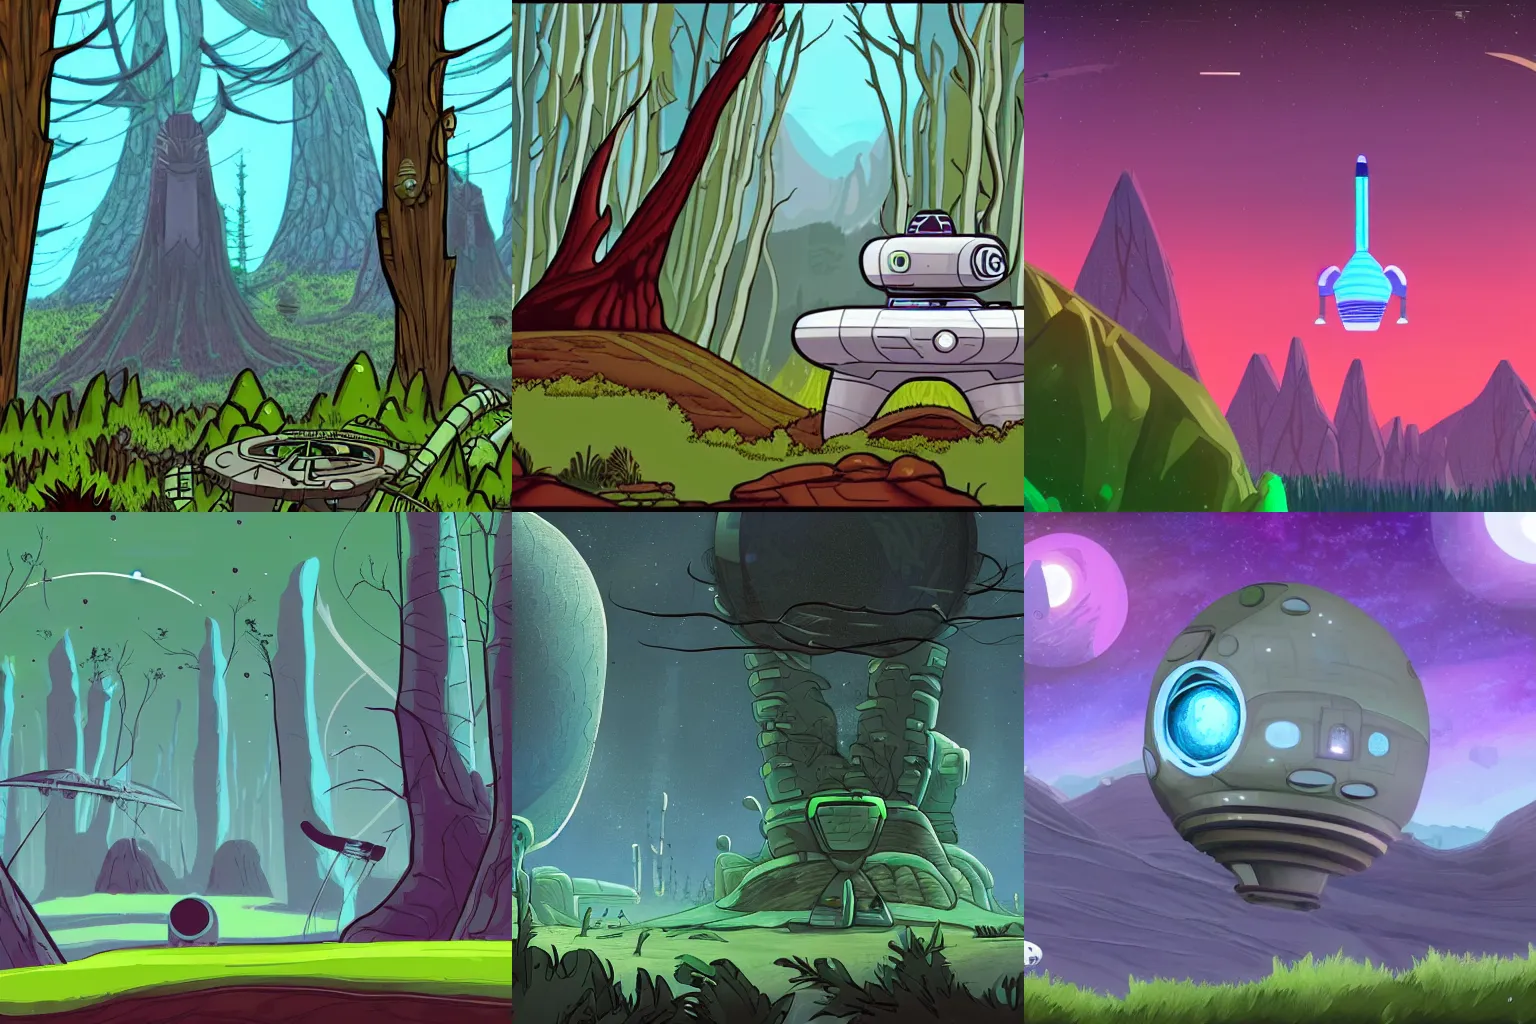 Prompt: a spaceship that has just landed at a spaceport on a strange alien planet, alien forest in background, from a space themed point and click 2D graphic adventure game, made in 2019, high quality graphics